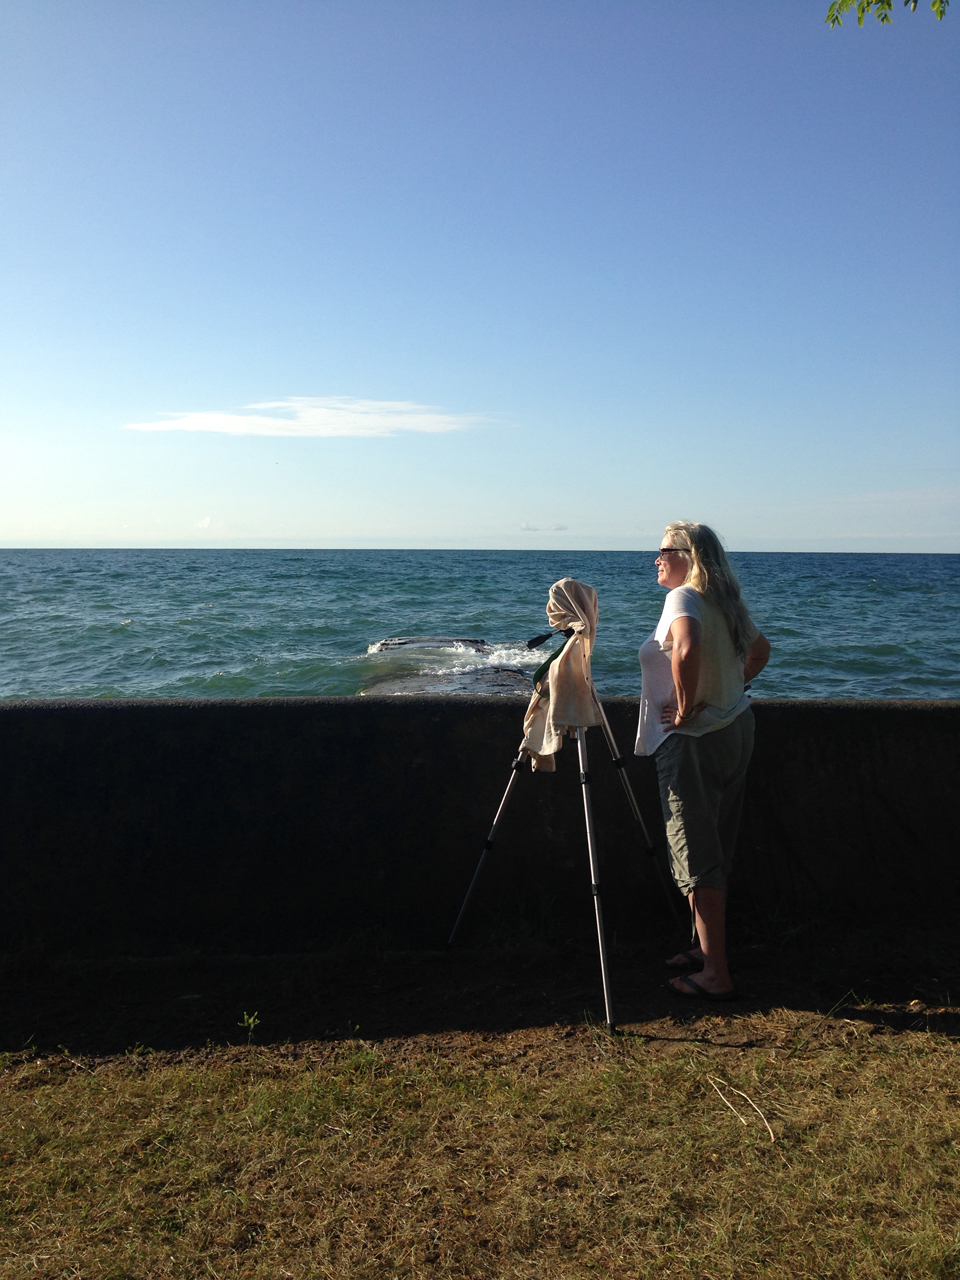 photo of the artist and her camera looking out over water